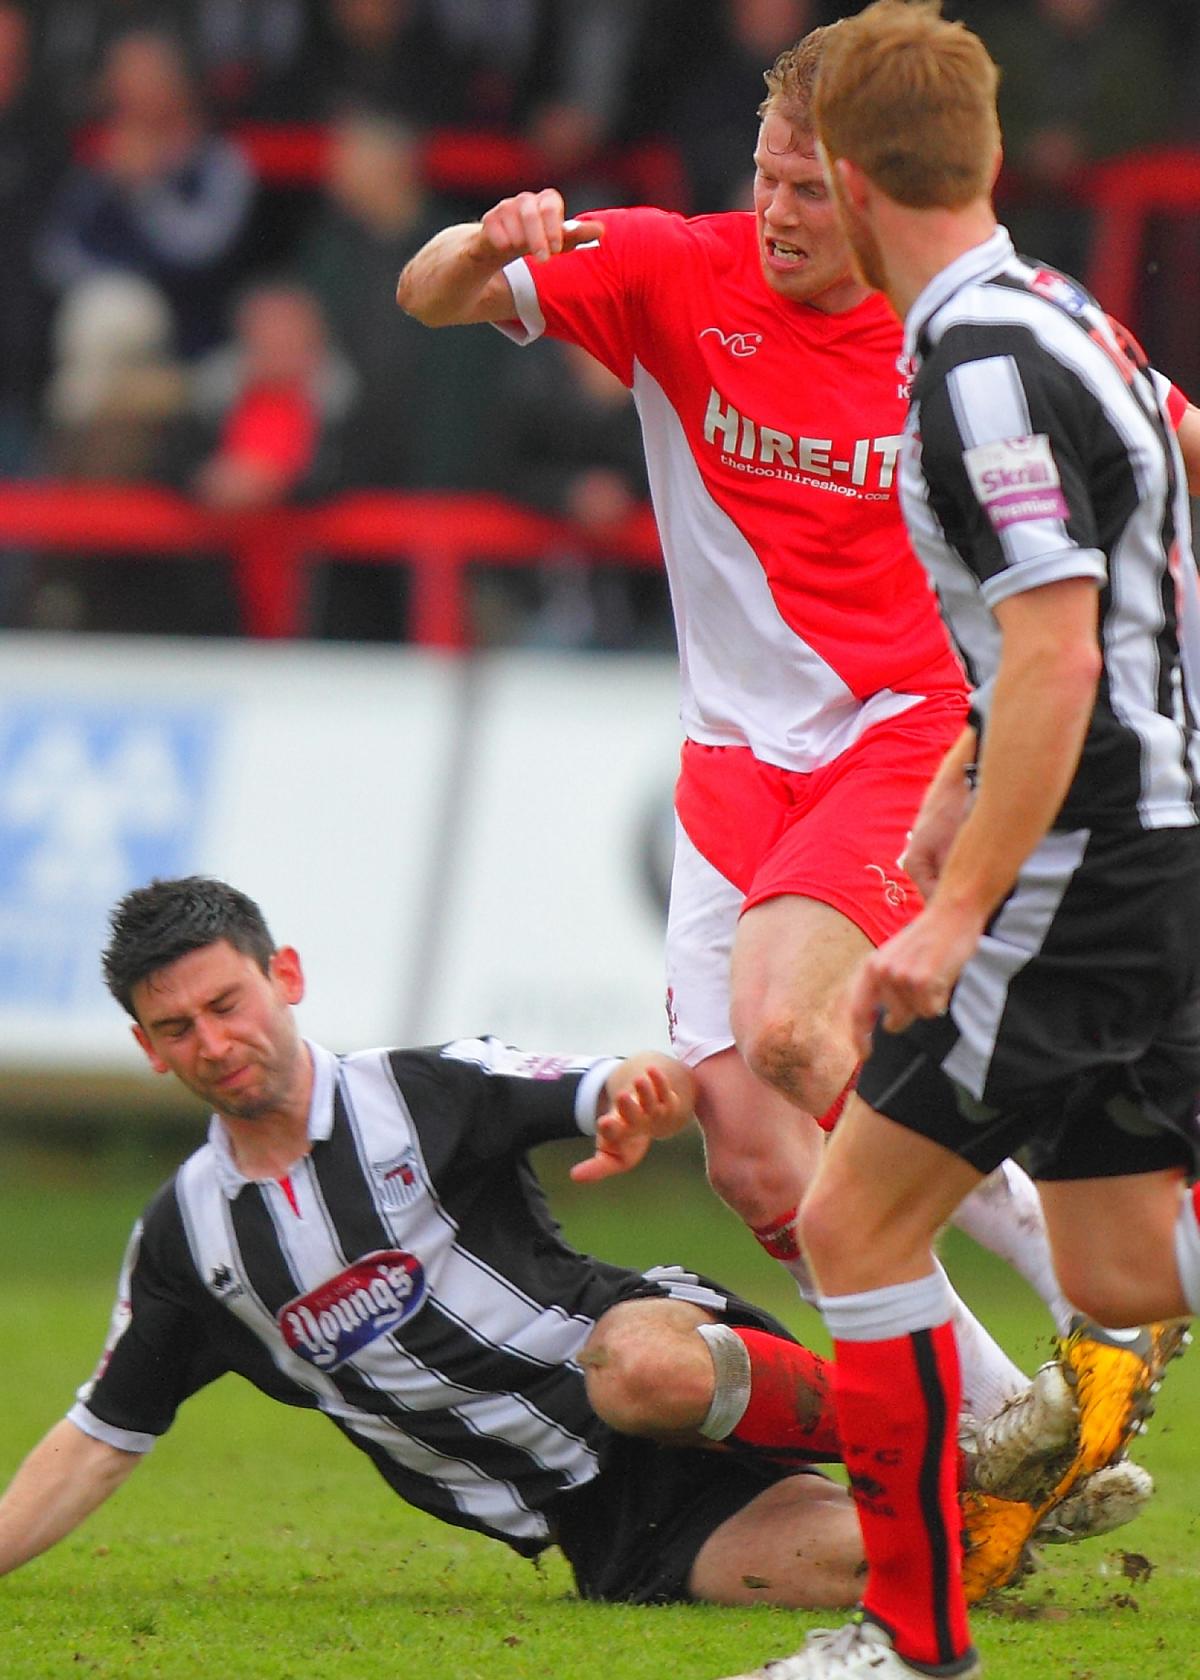 GARY Whild suffered his first defeat as Harriers boss against play-off rivals Grimsby. Alex Rodman's eye-catching effort proving to be the difference.